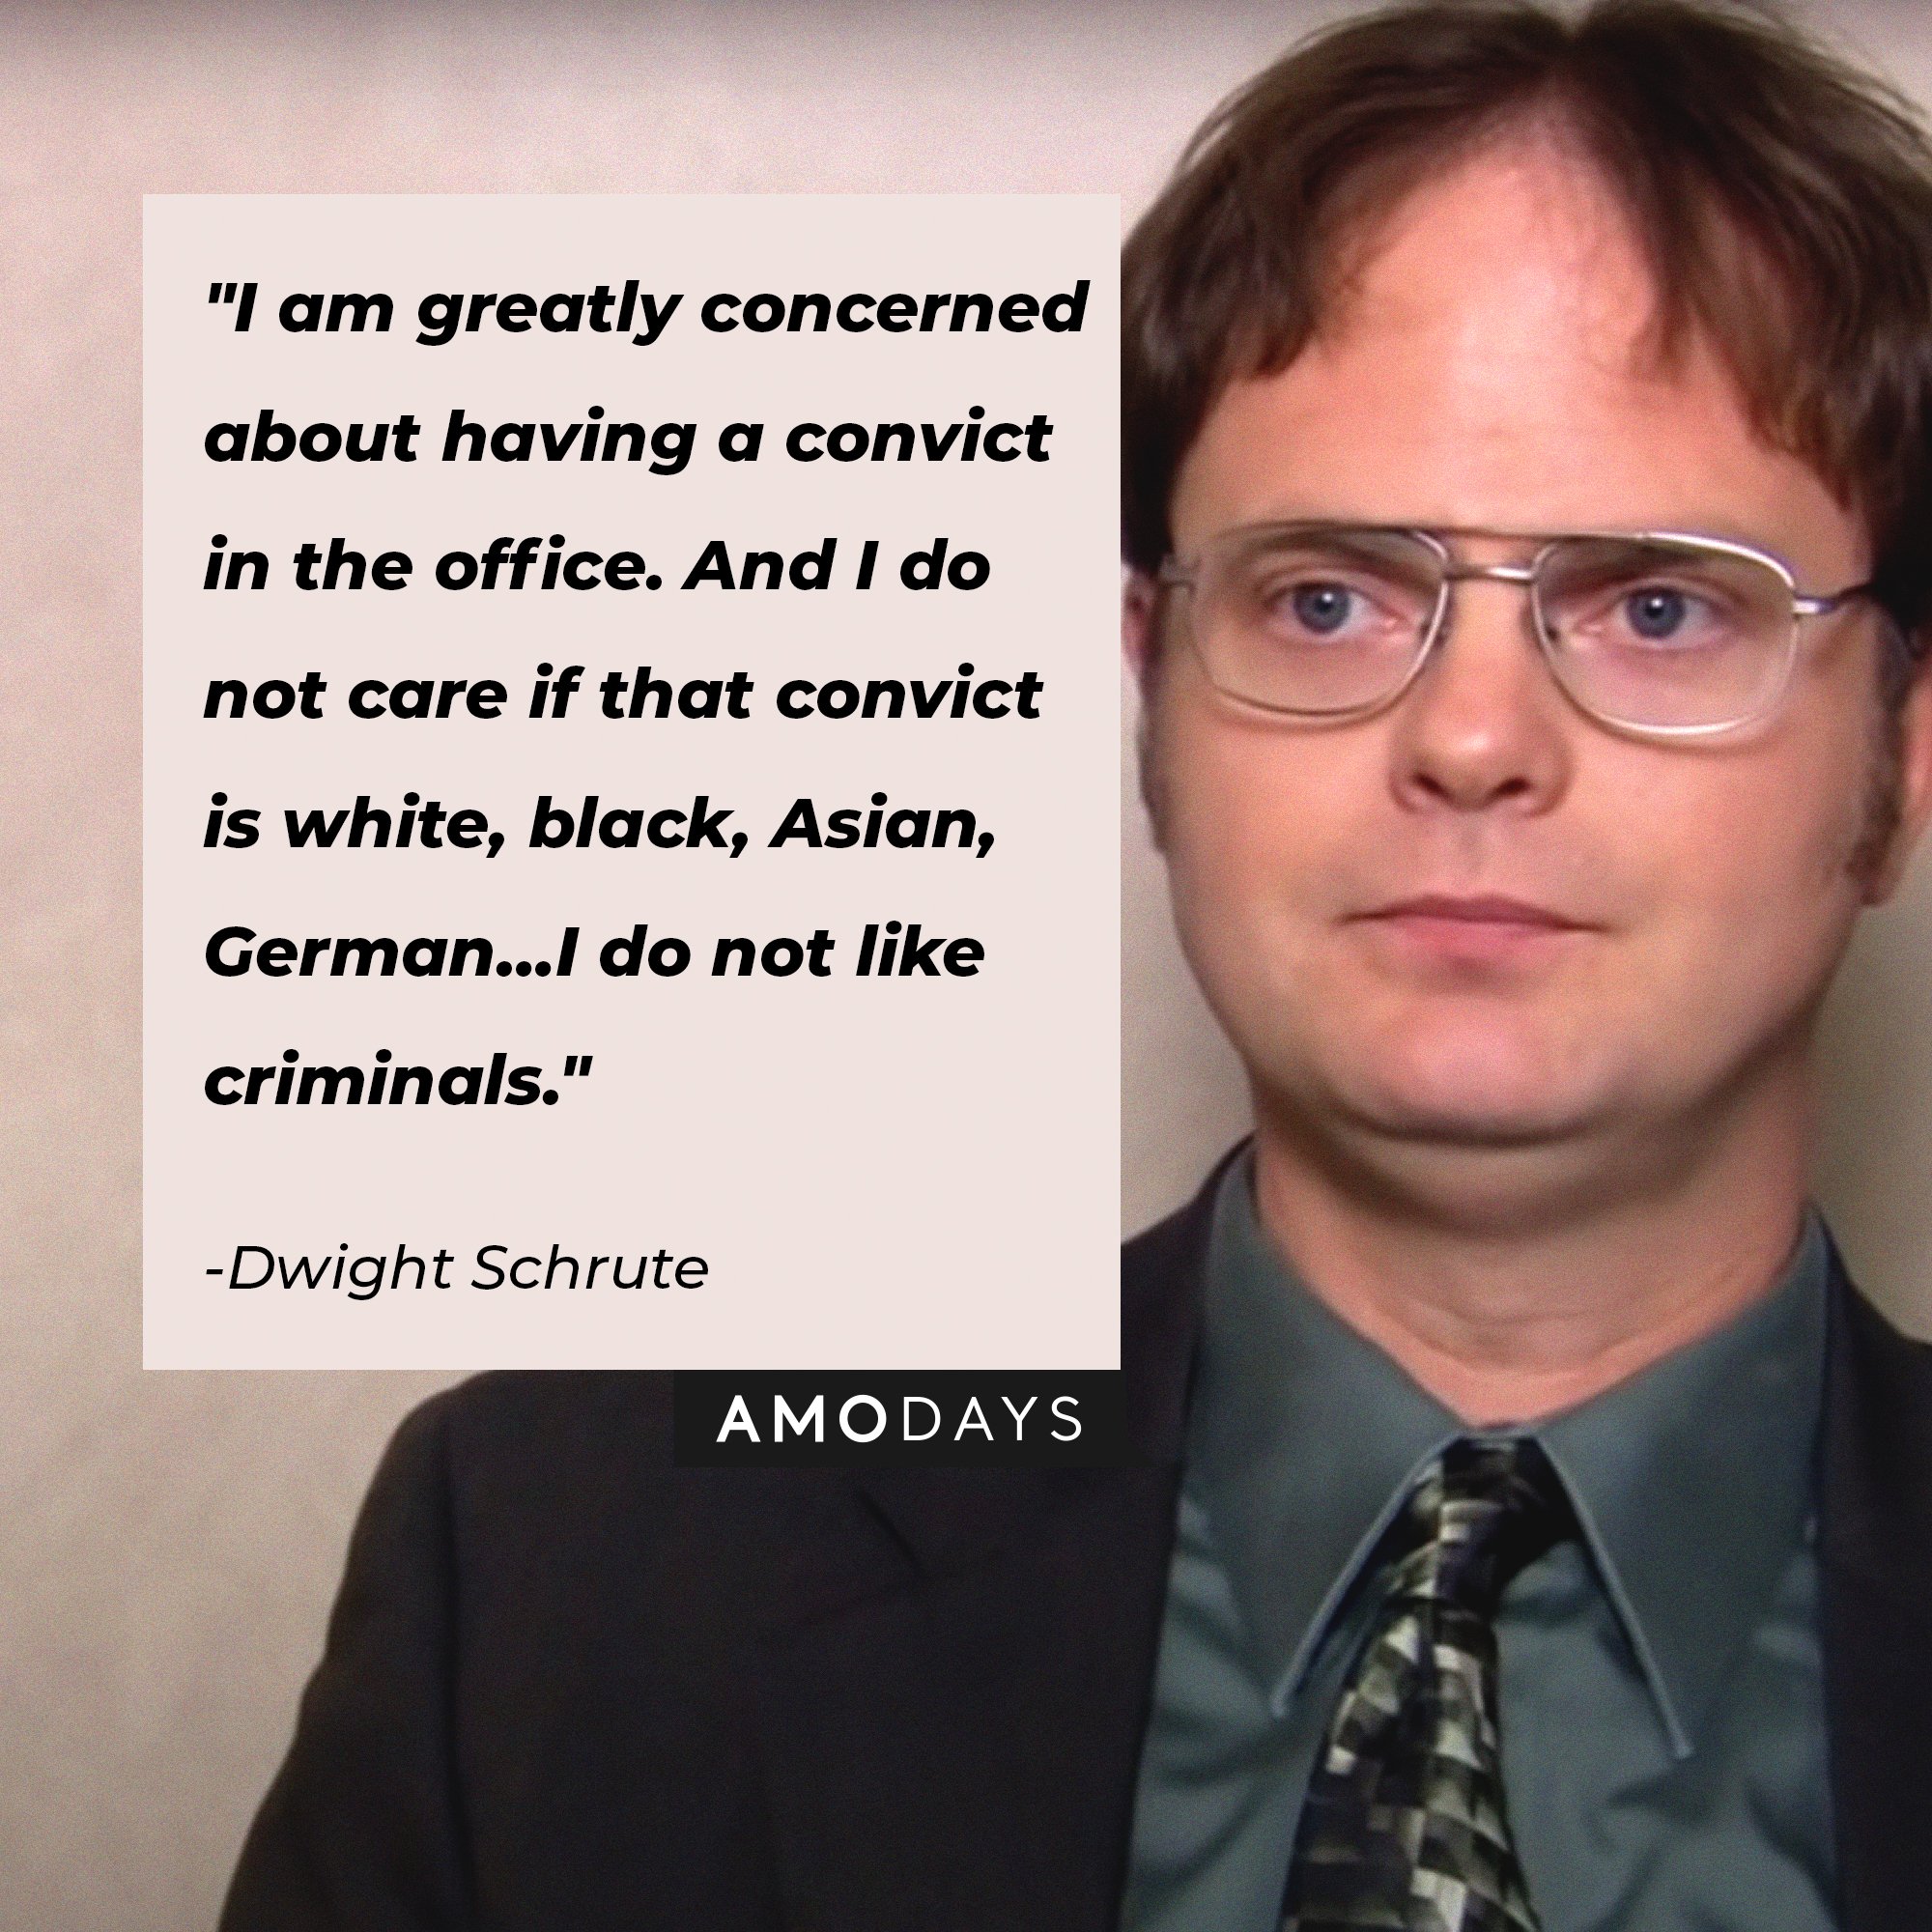 Dwight Schrute’s quote: "I am greatly concerned about having a convict in the office. And I do not care if that convict is white, black, Asian, German… I do not like criminals."  | Image: AmoDays